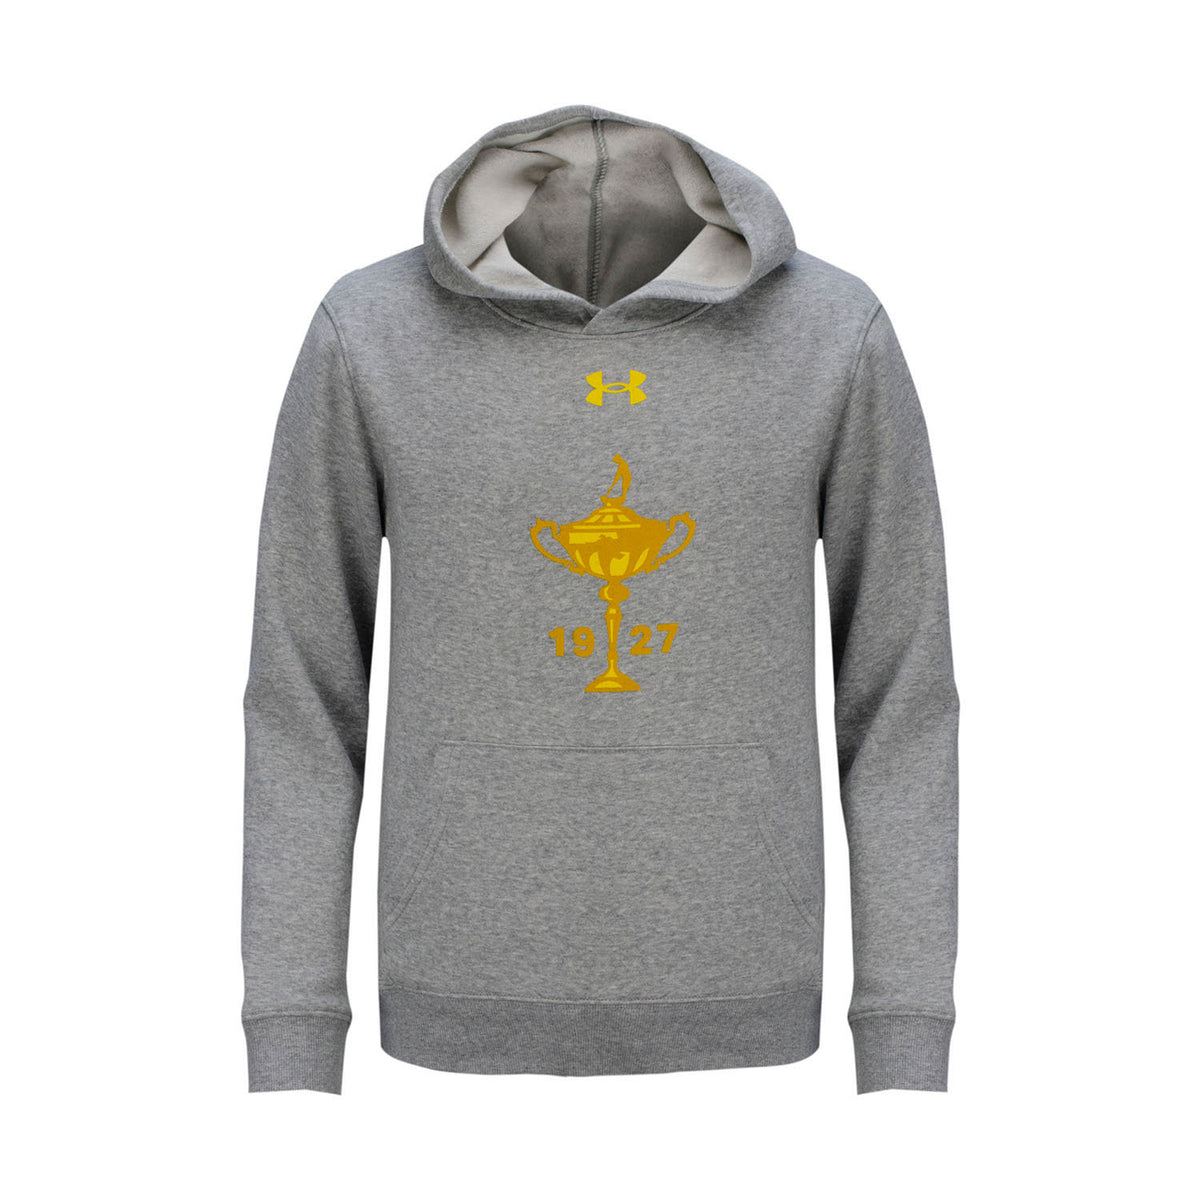 Boys Youth All Day Fleece Hoodie - Grey- Front View